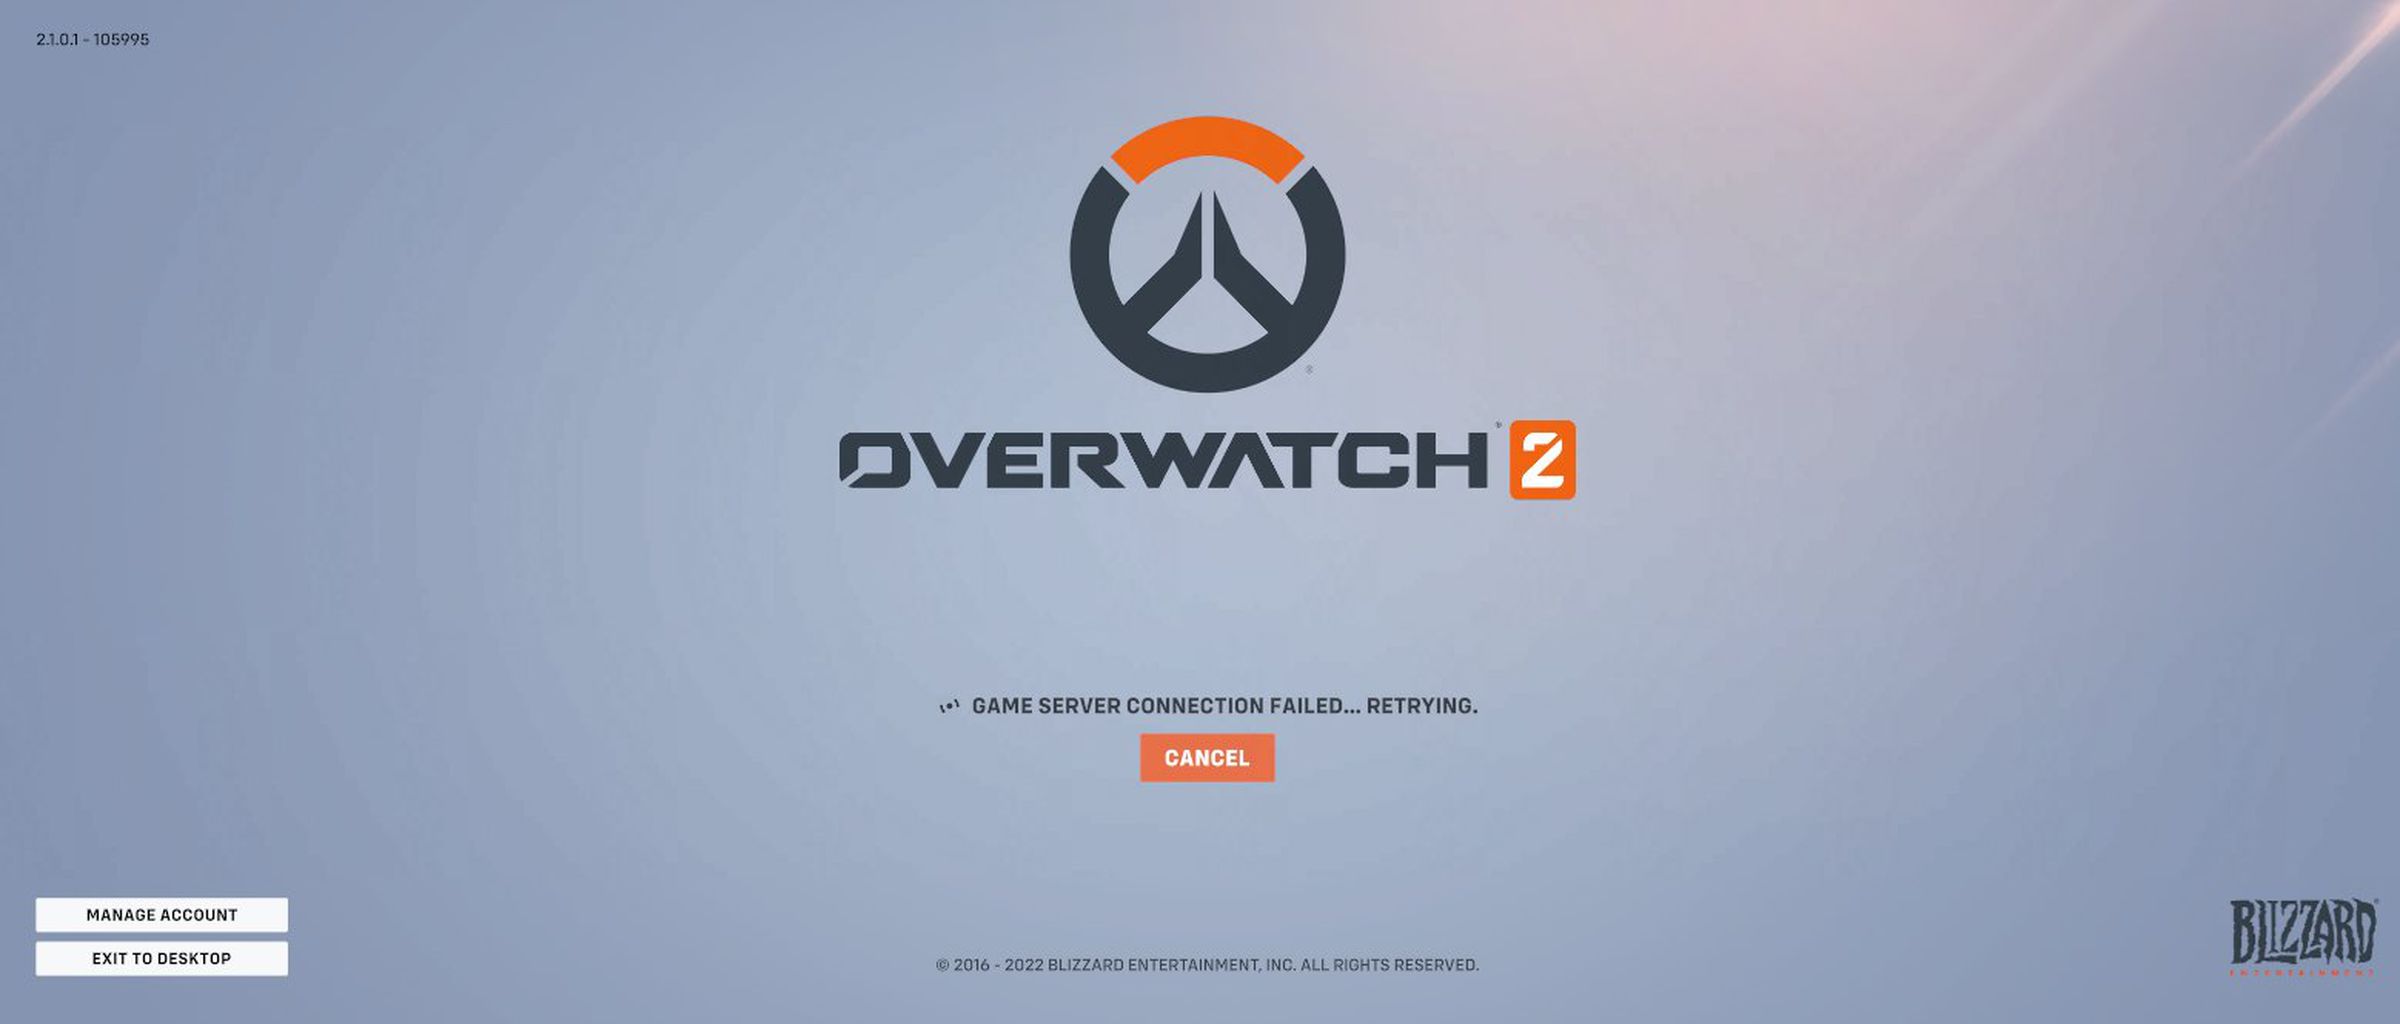 Overwatch 2 “server connection failed...retrying” error screen